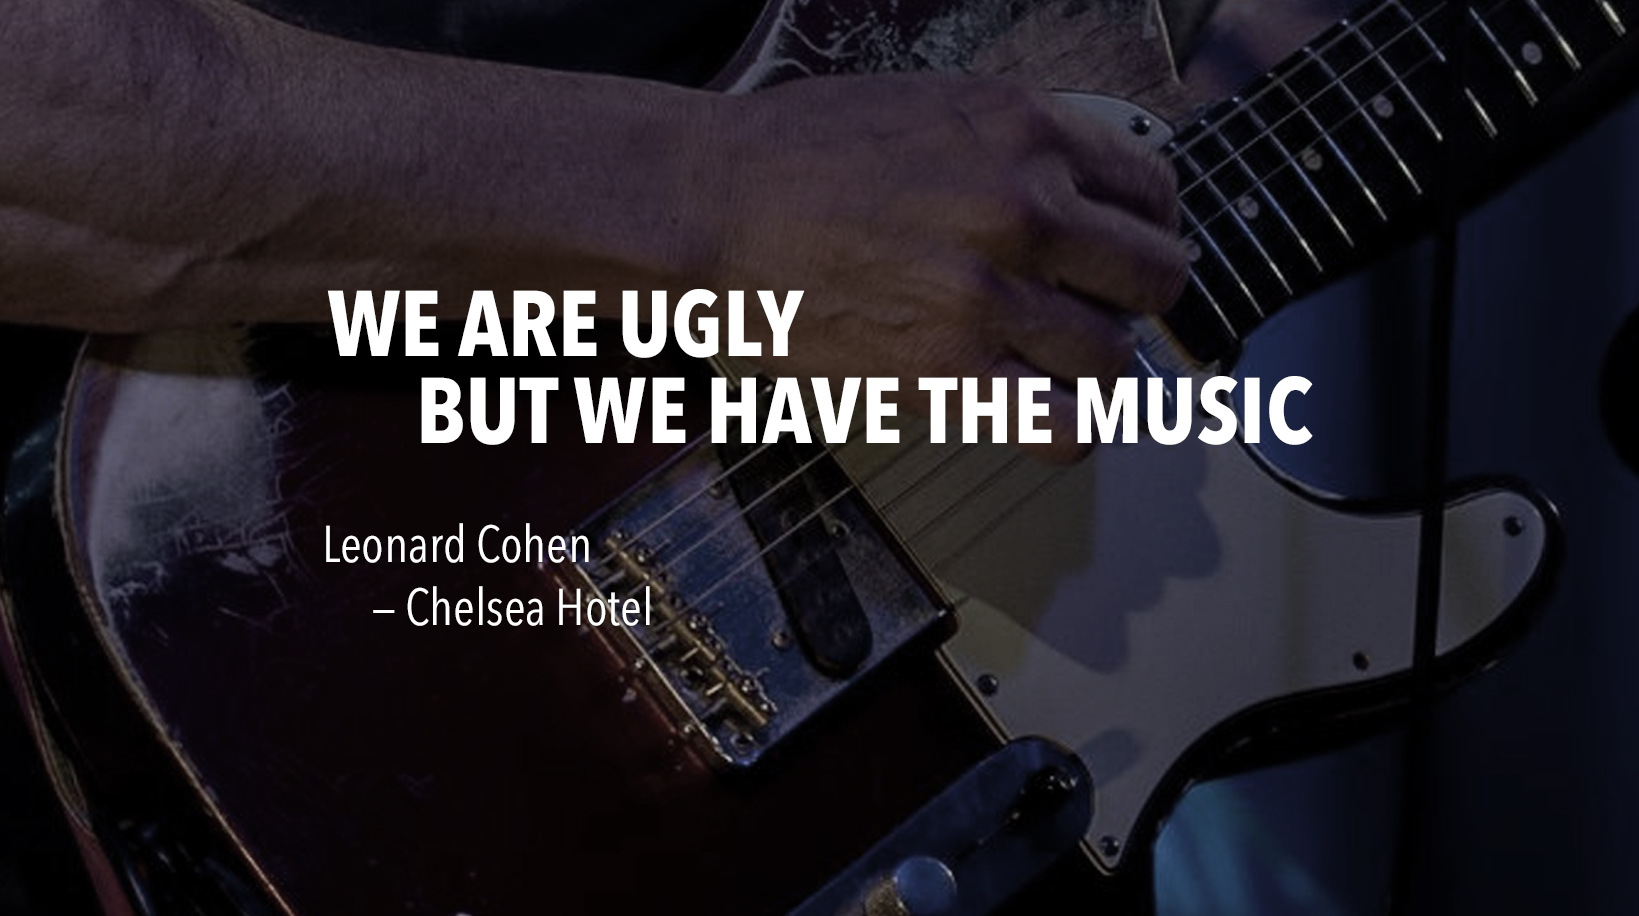 We are UGLY but we have the music